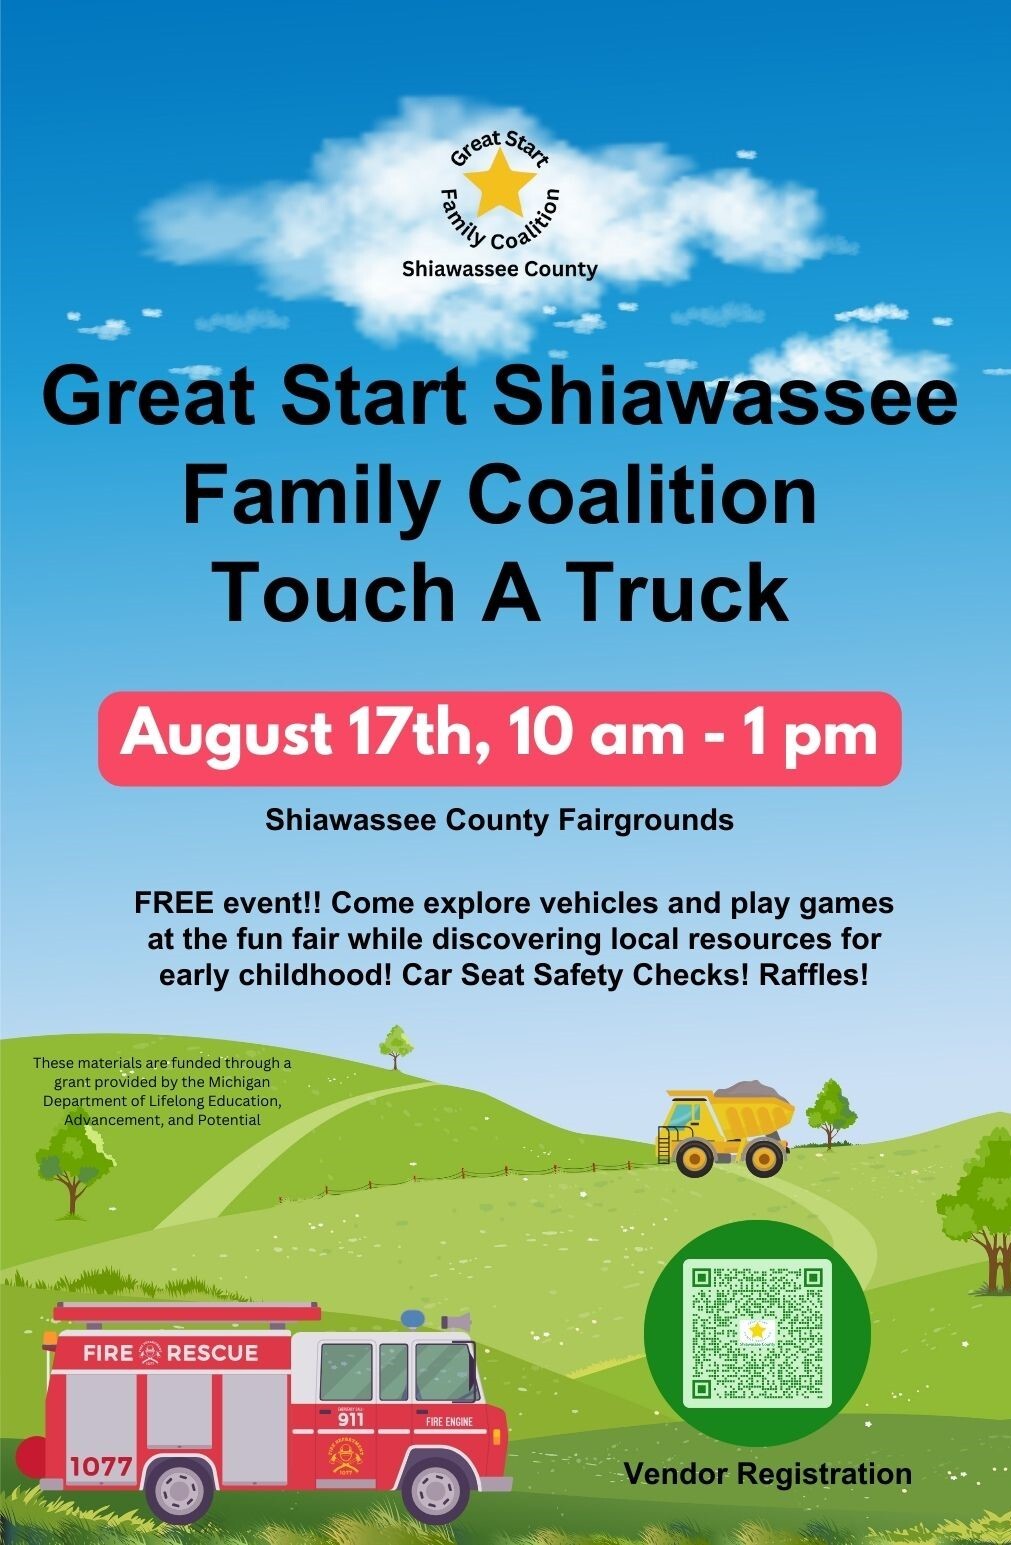 Link to for venders to register for the August 17th Touch A Truck event.